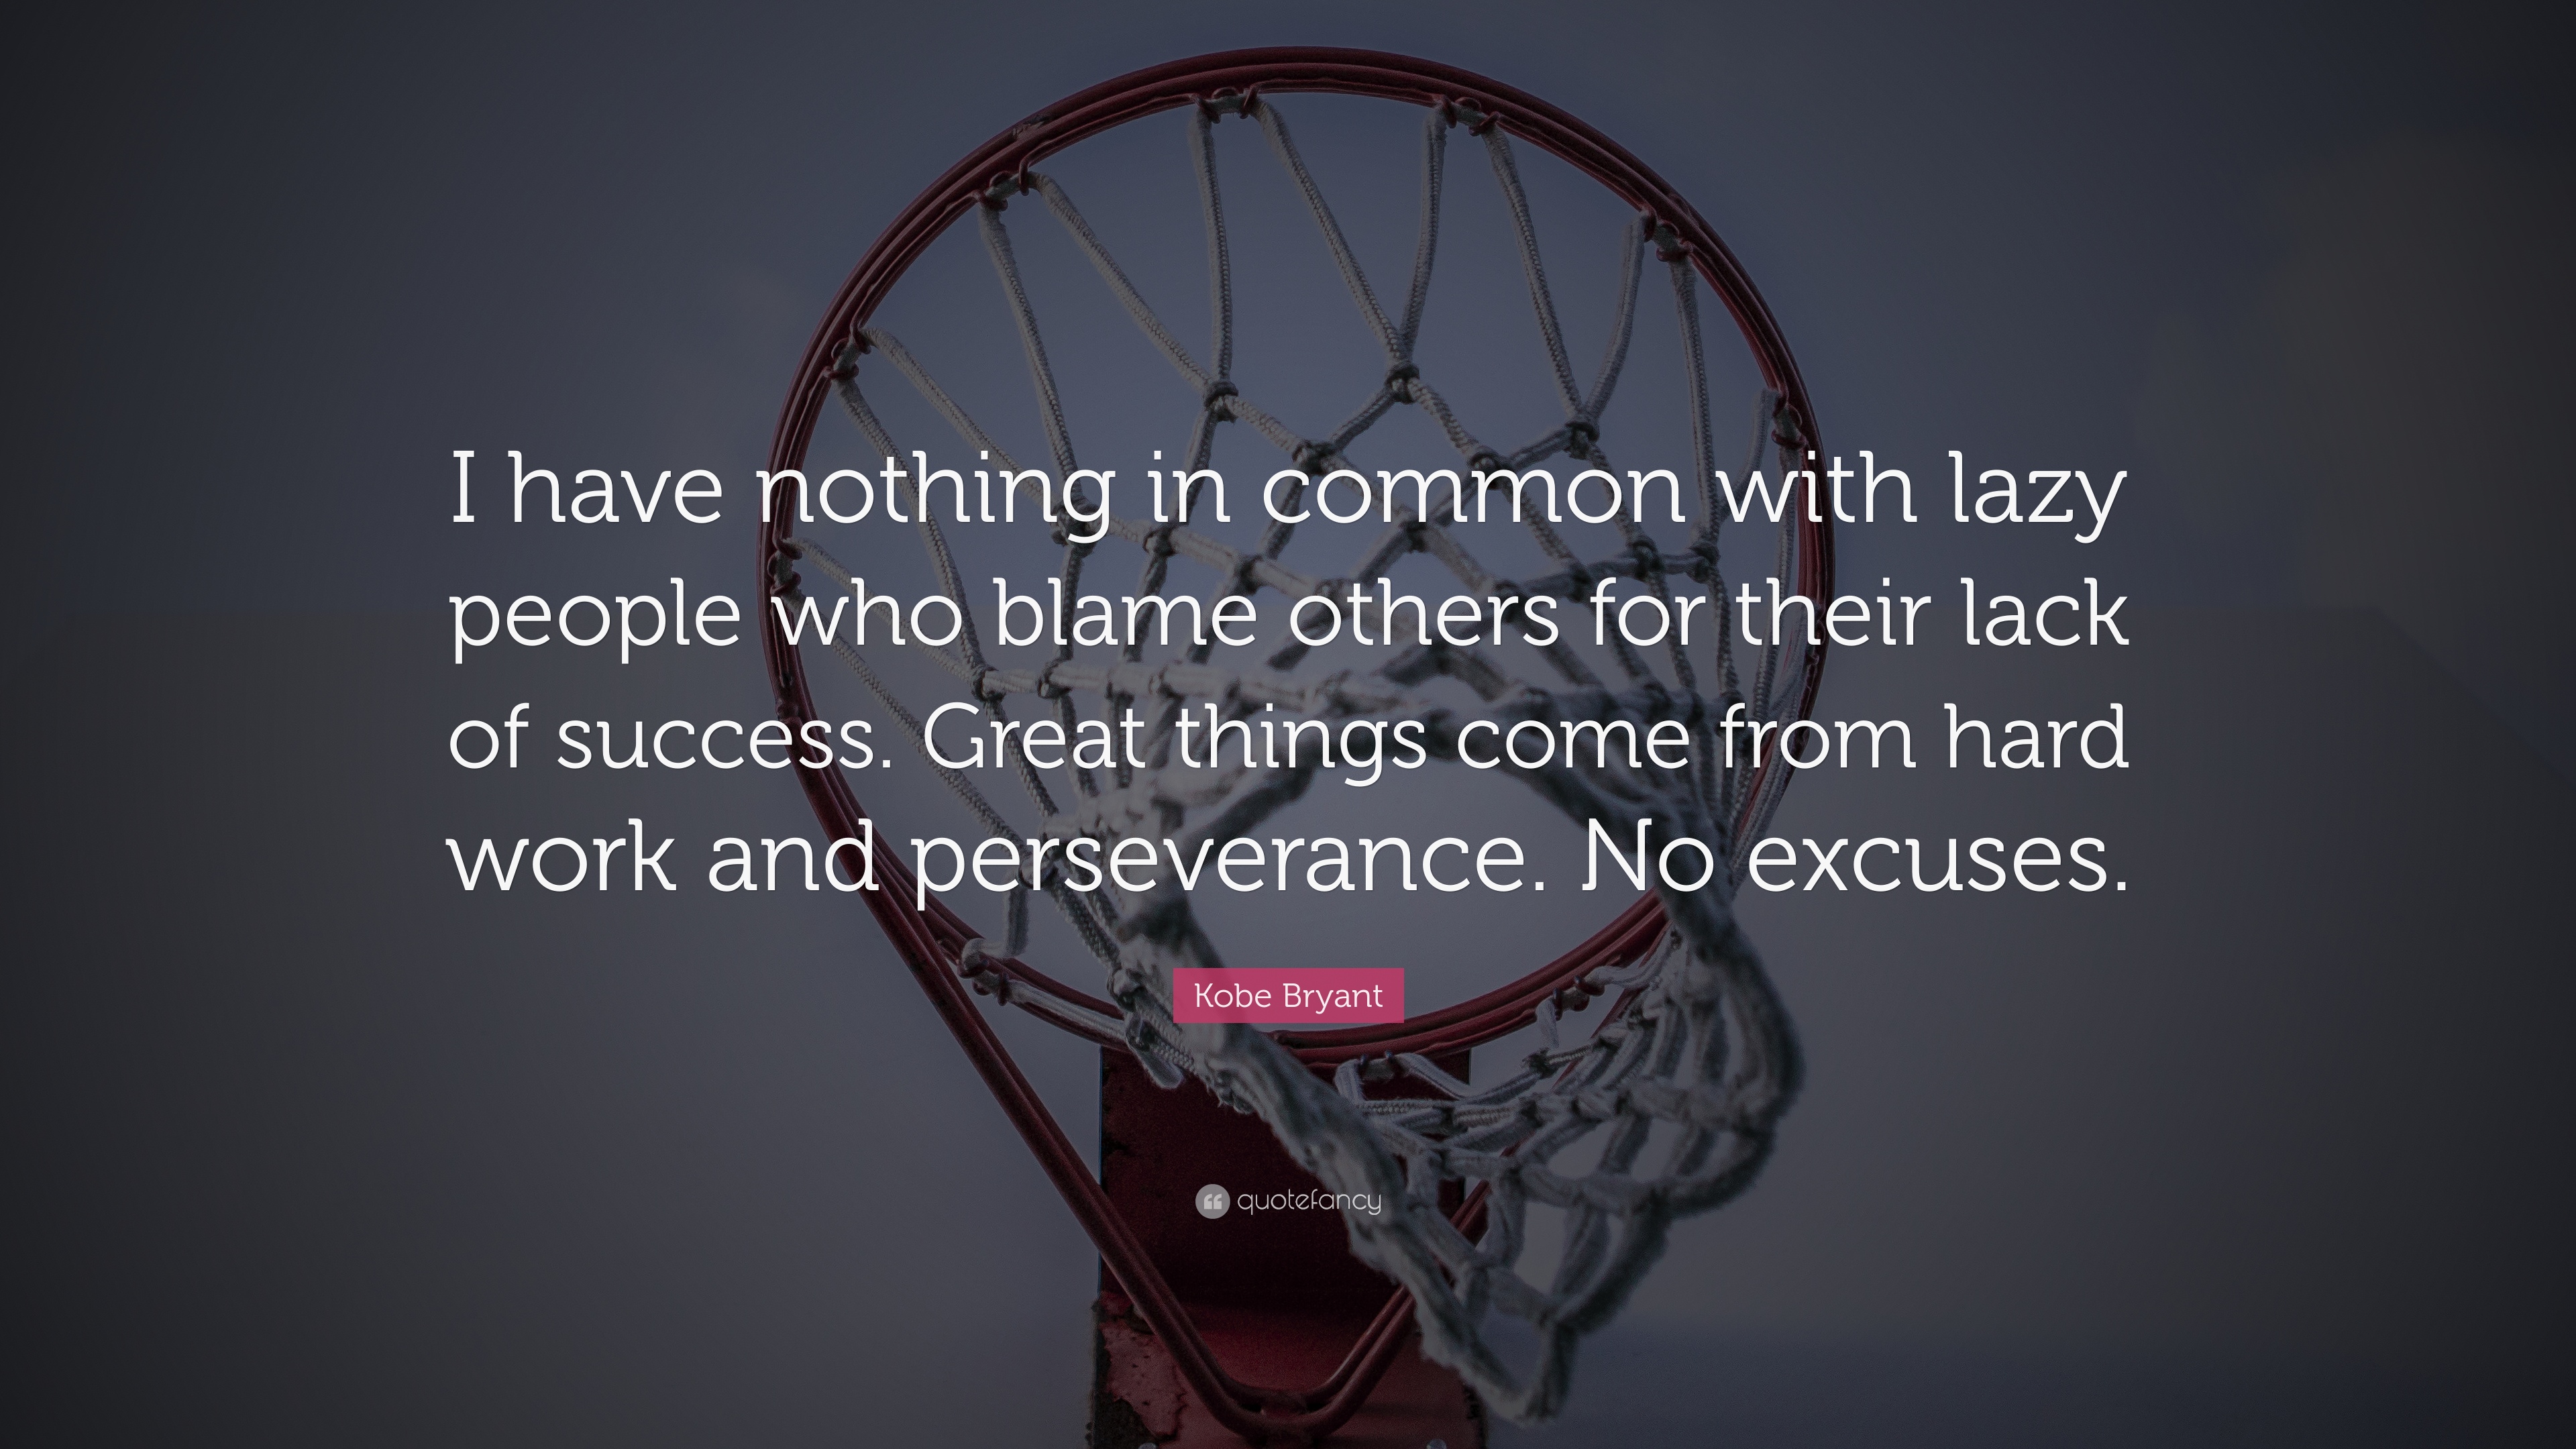 Kobe Bryant Quote - Push Yourself Larry Bird Quotes - HD Wallpaper 